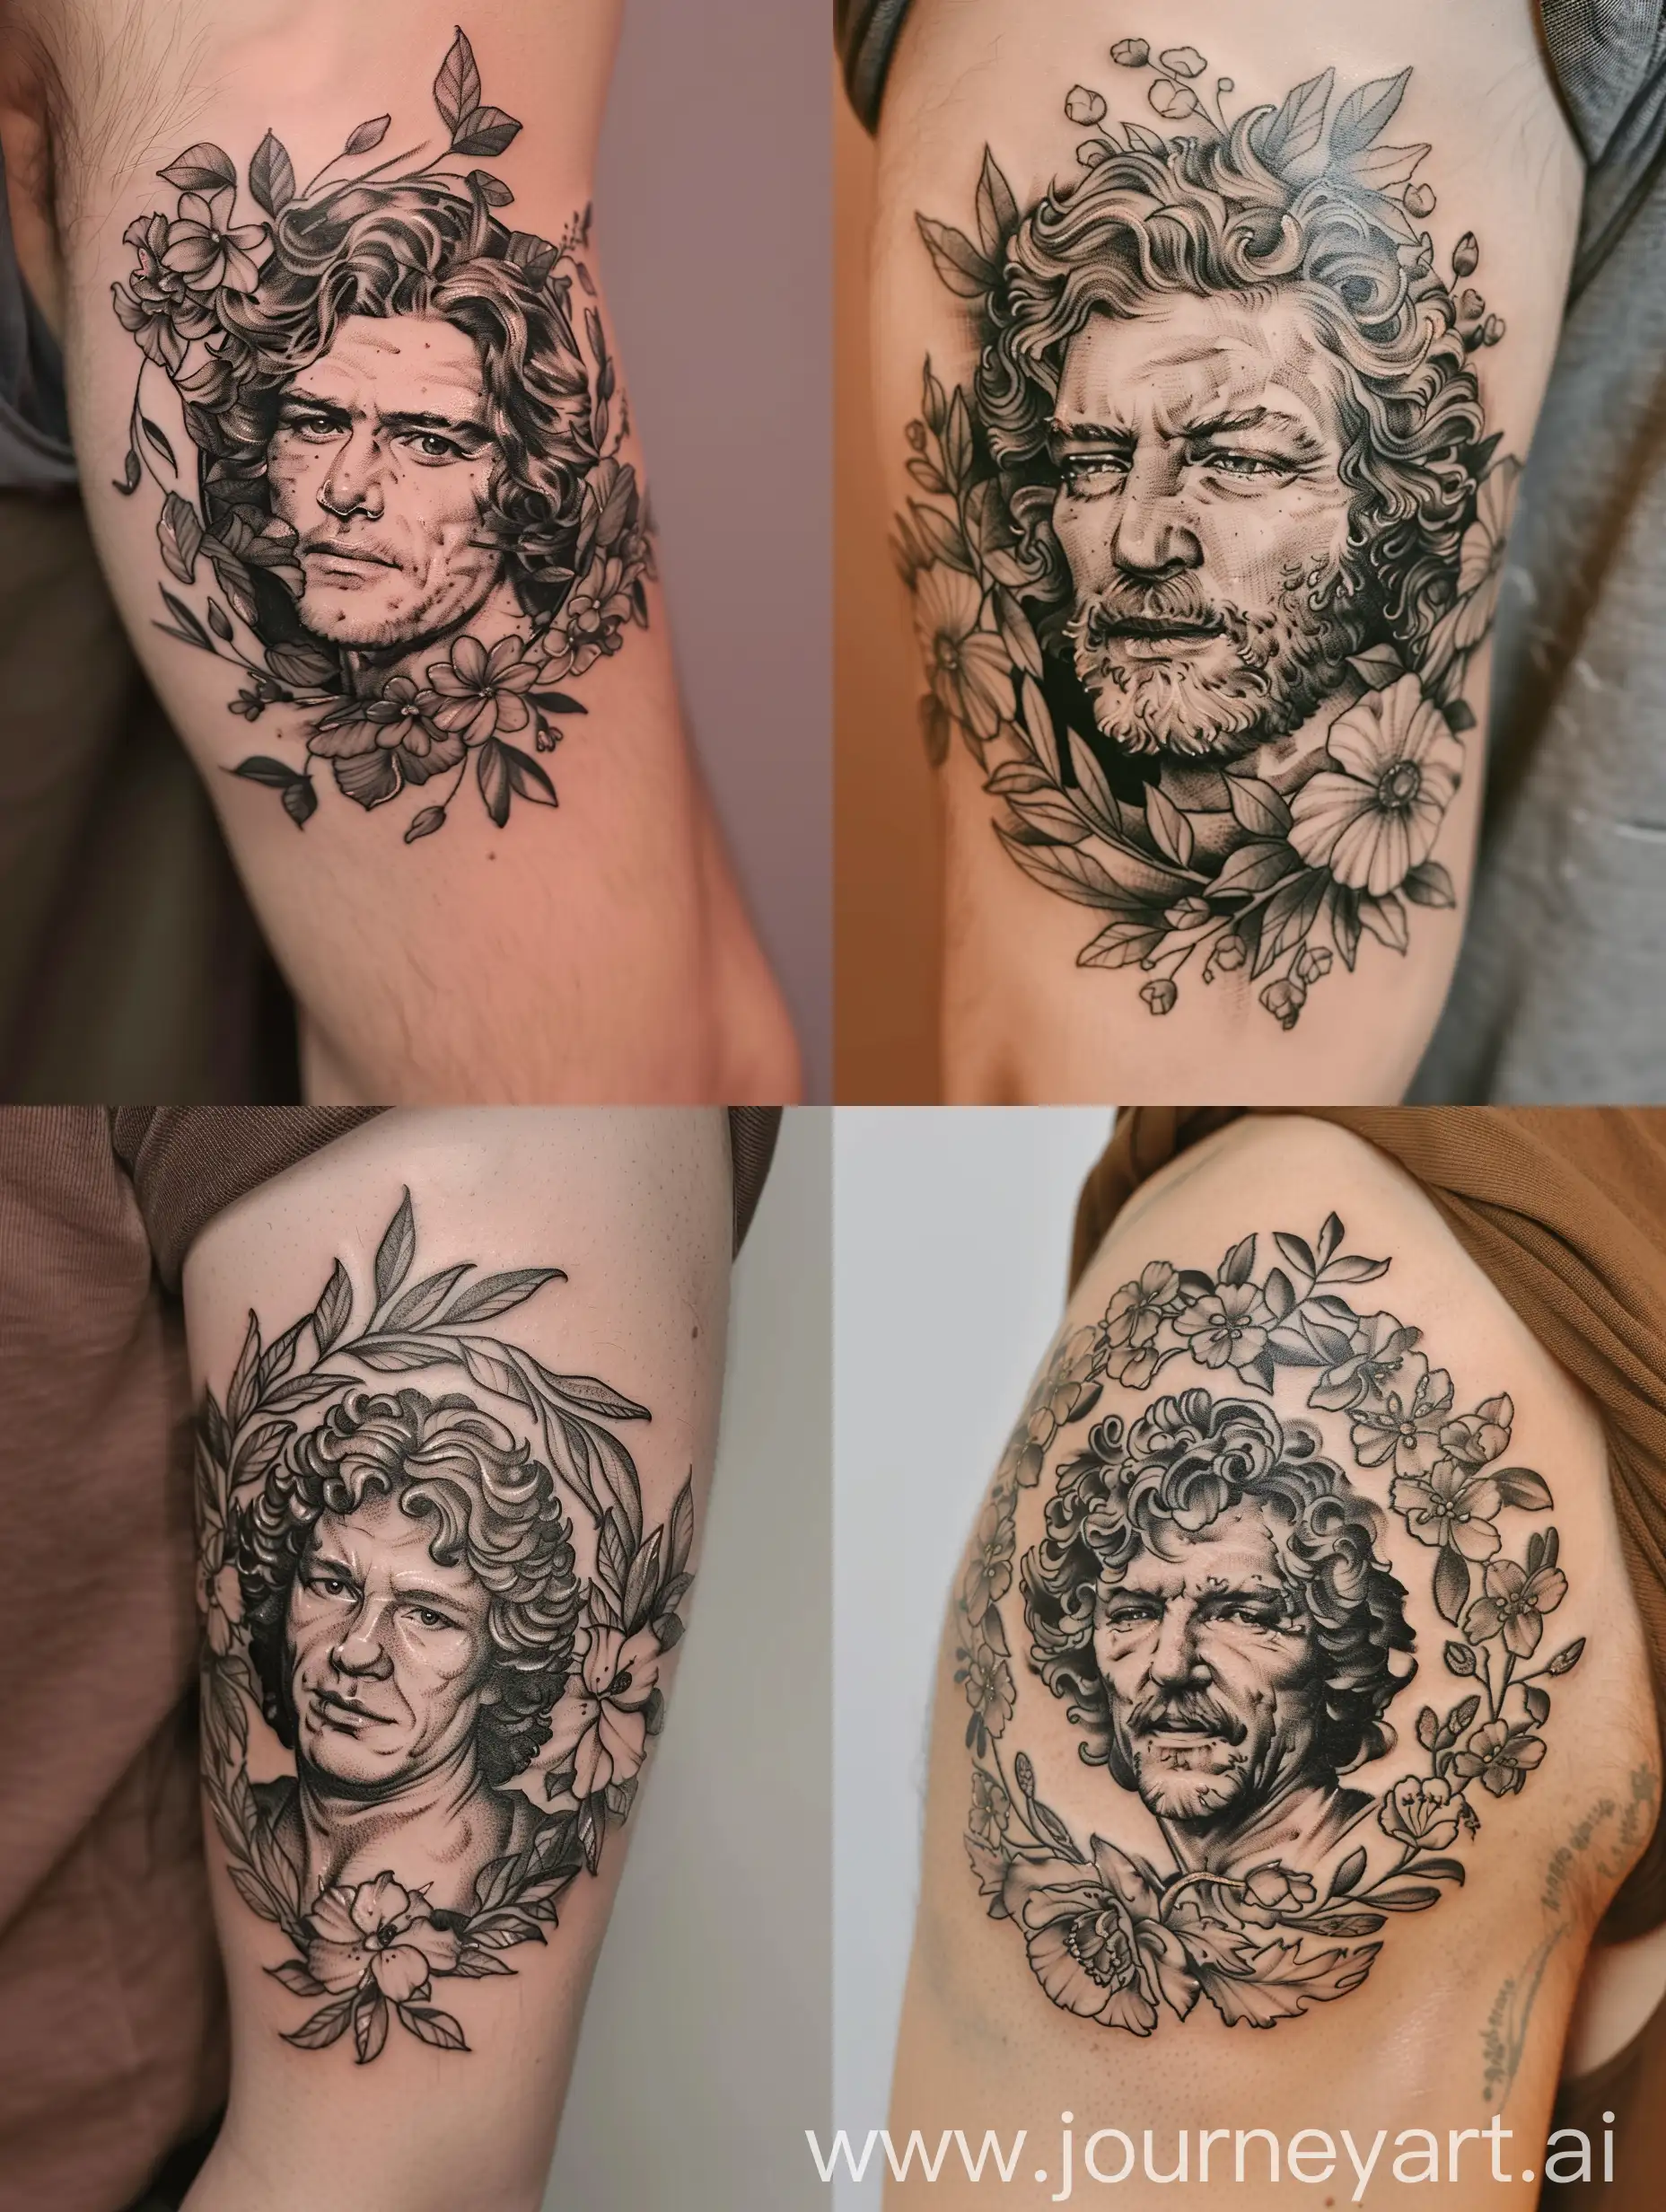 A realistic portrait of Robert Plant, the lead singer of Led Zeppelin, surrounded by a wreath of flowers and leaves. The tattoo is done in black and gray, and the shading is done with intricate details to make the portrait appear lifelike.